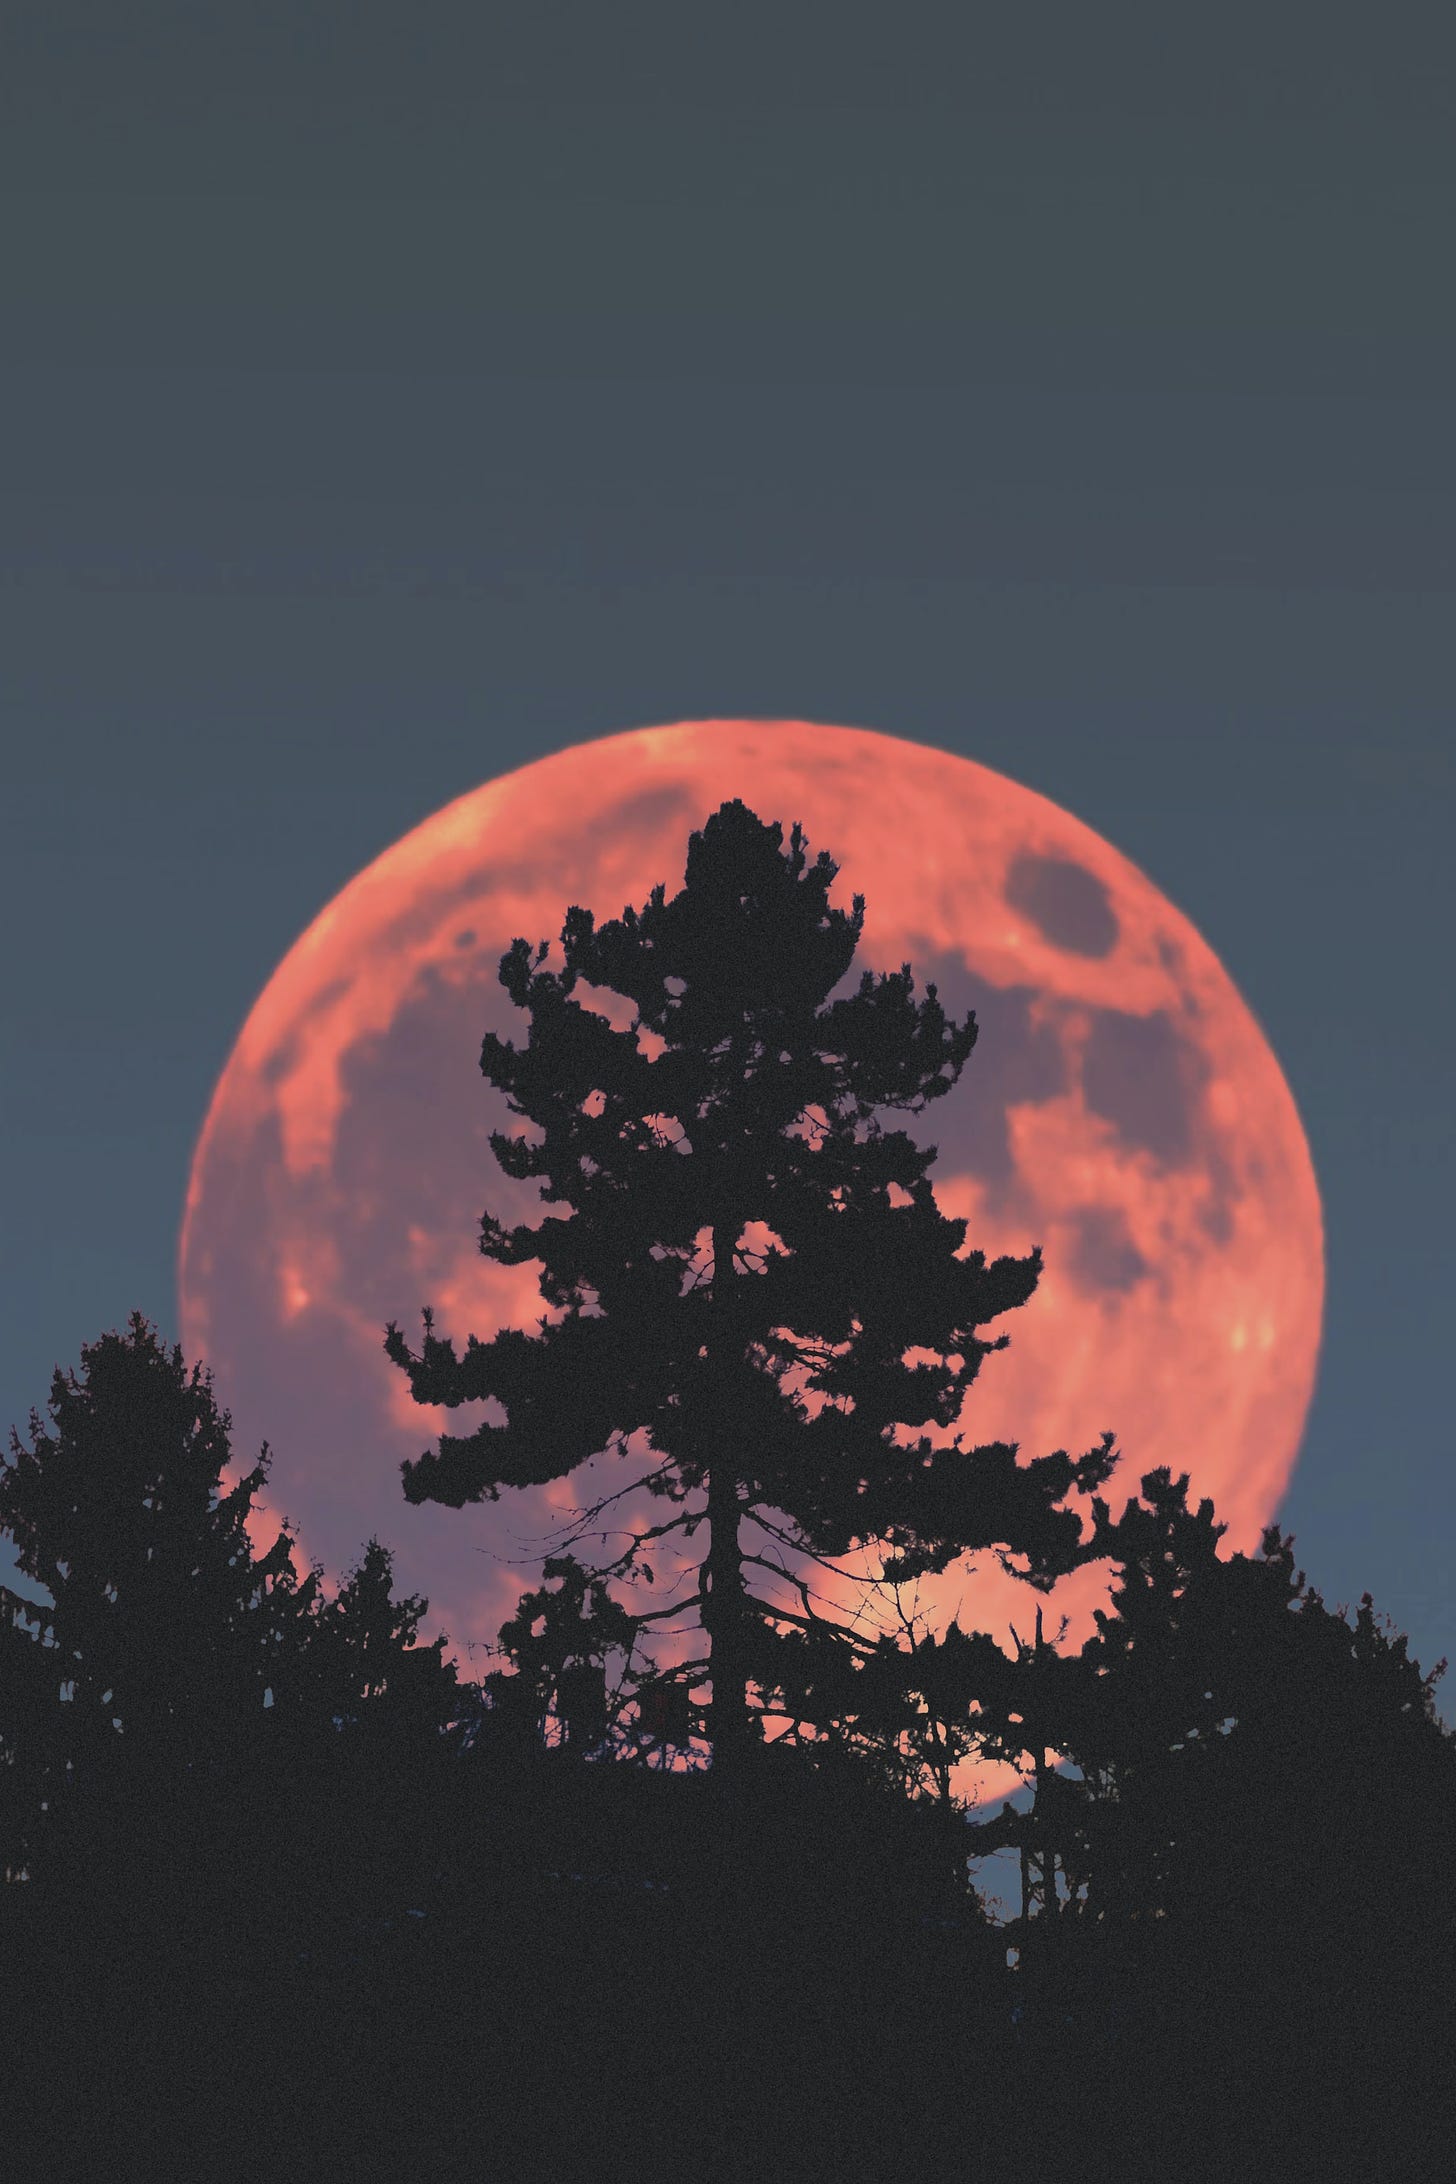 A full moon rises above a silhouetted pine tree in the night sky, accompanied by the profound words of the poem "You Want to Know, First Forget" 